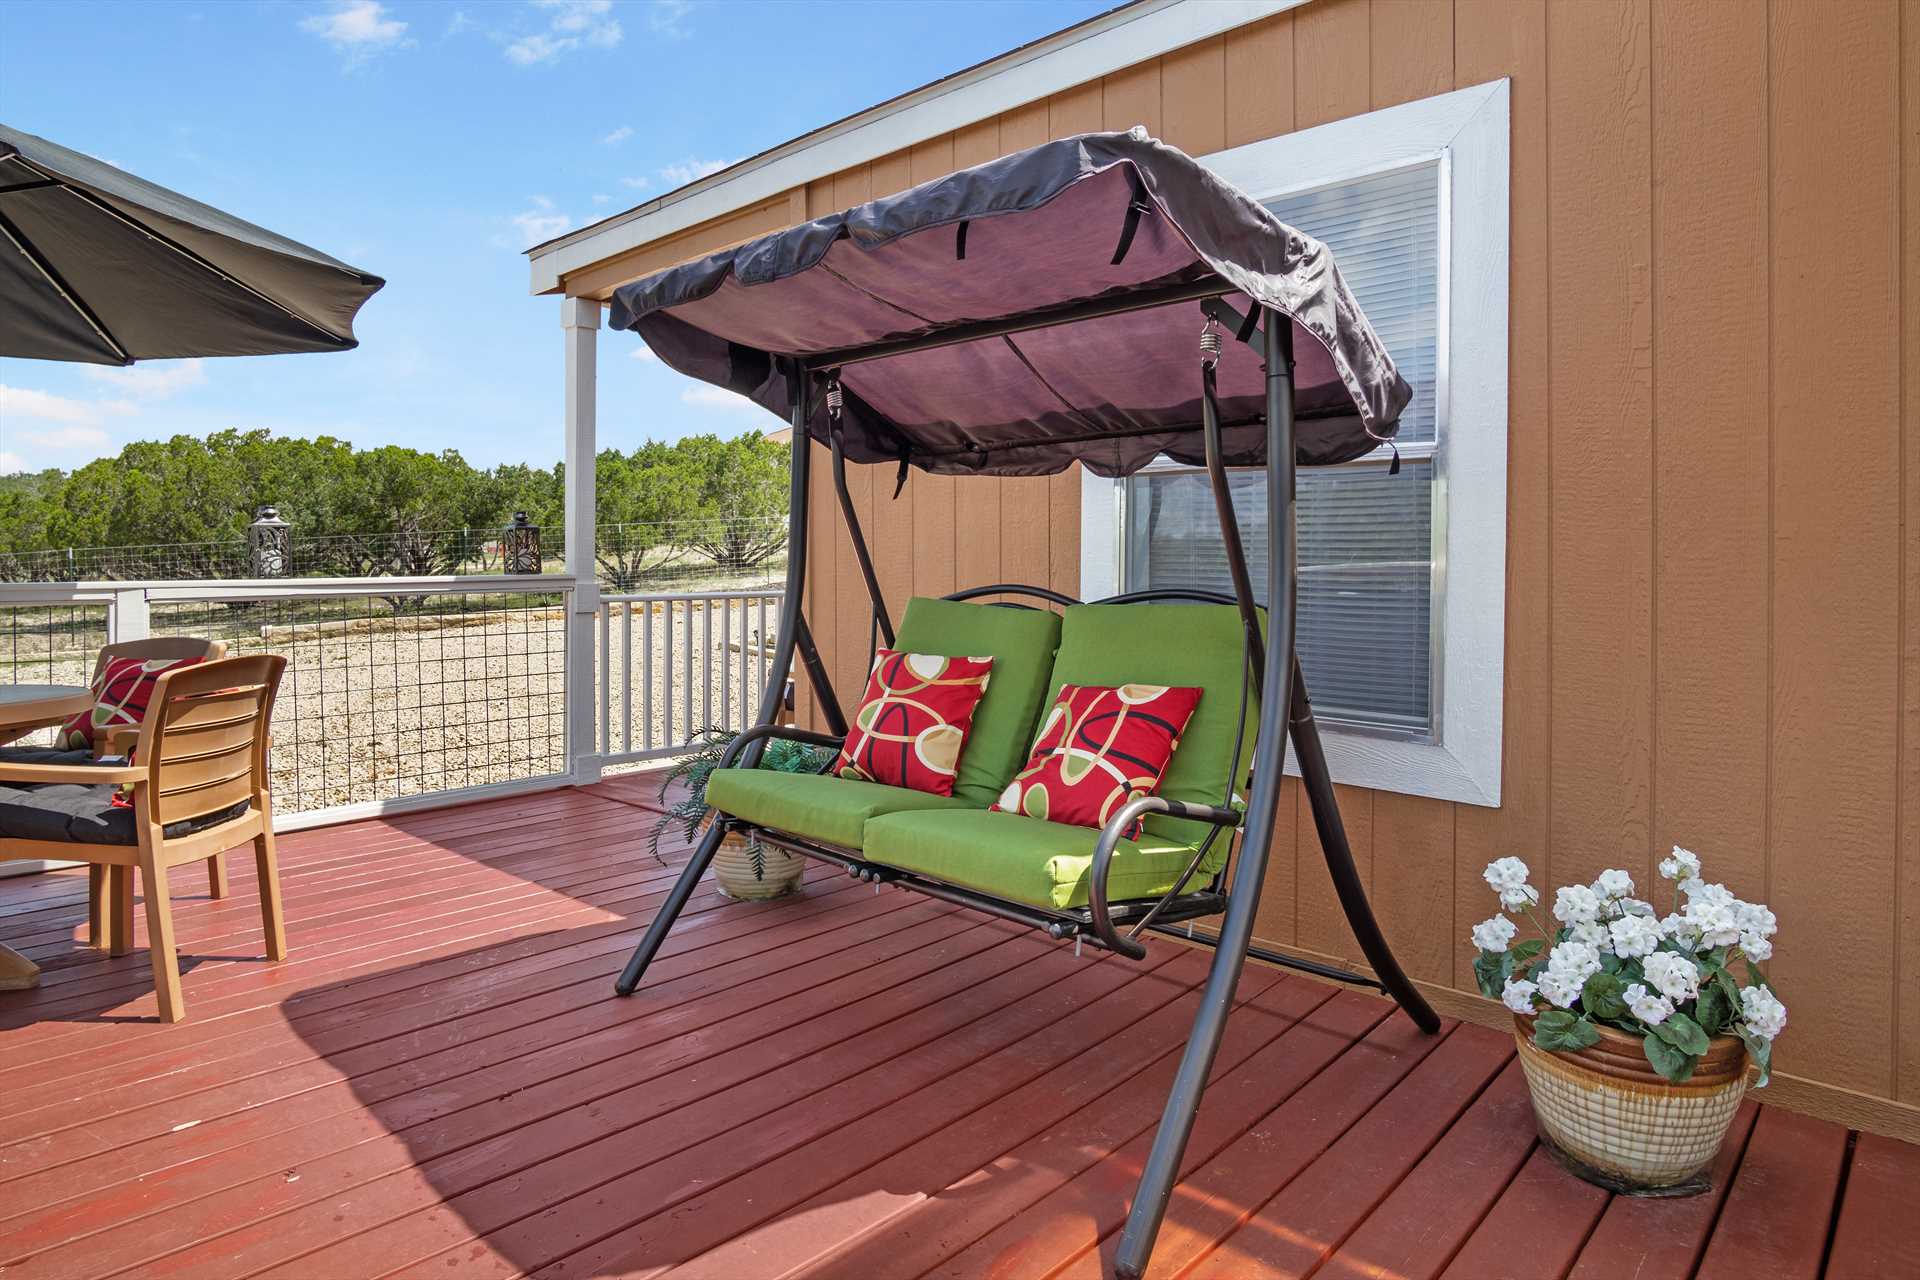                                                 Let the fresh-air breezes waft over you as you enjoy the slow and steady rhythm of the deck swing.